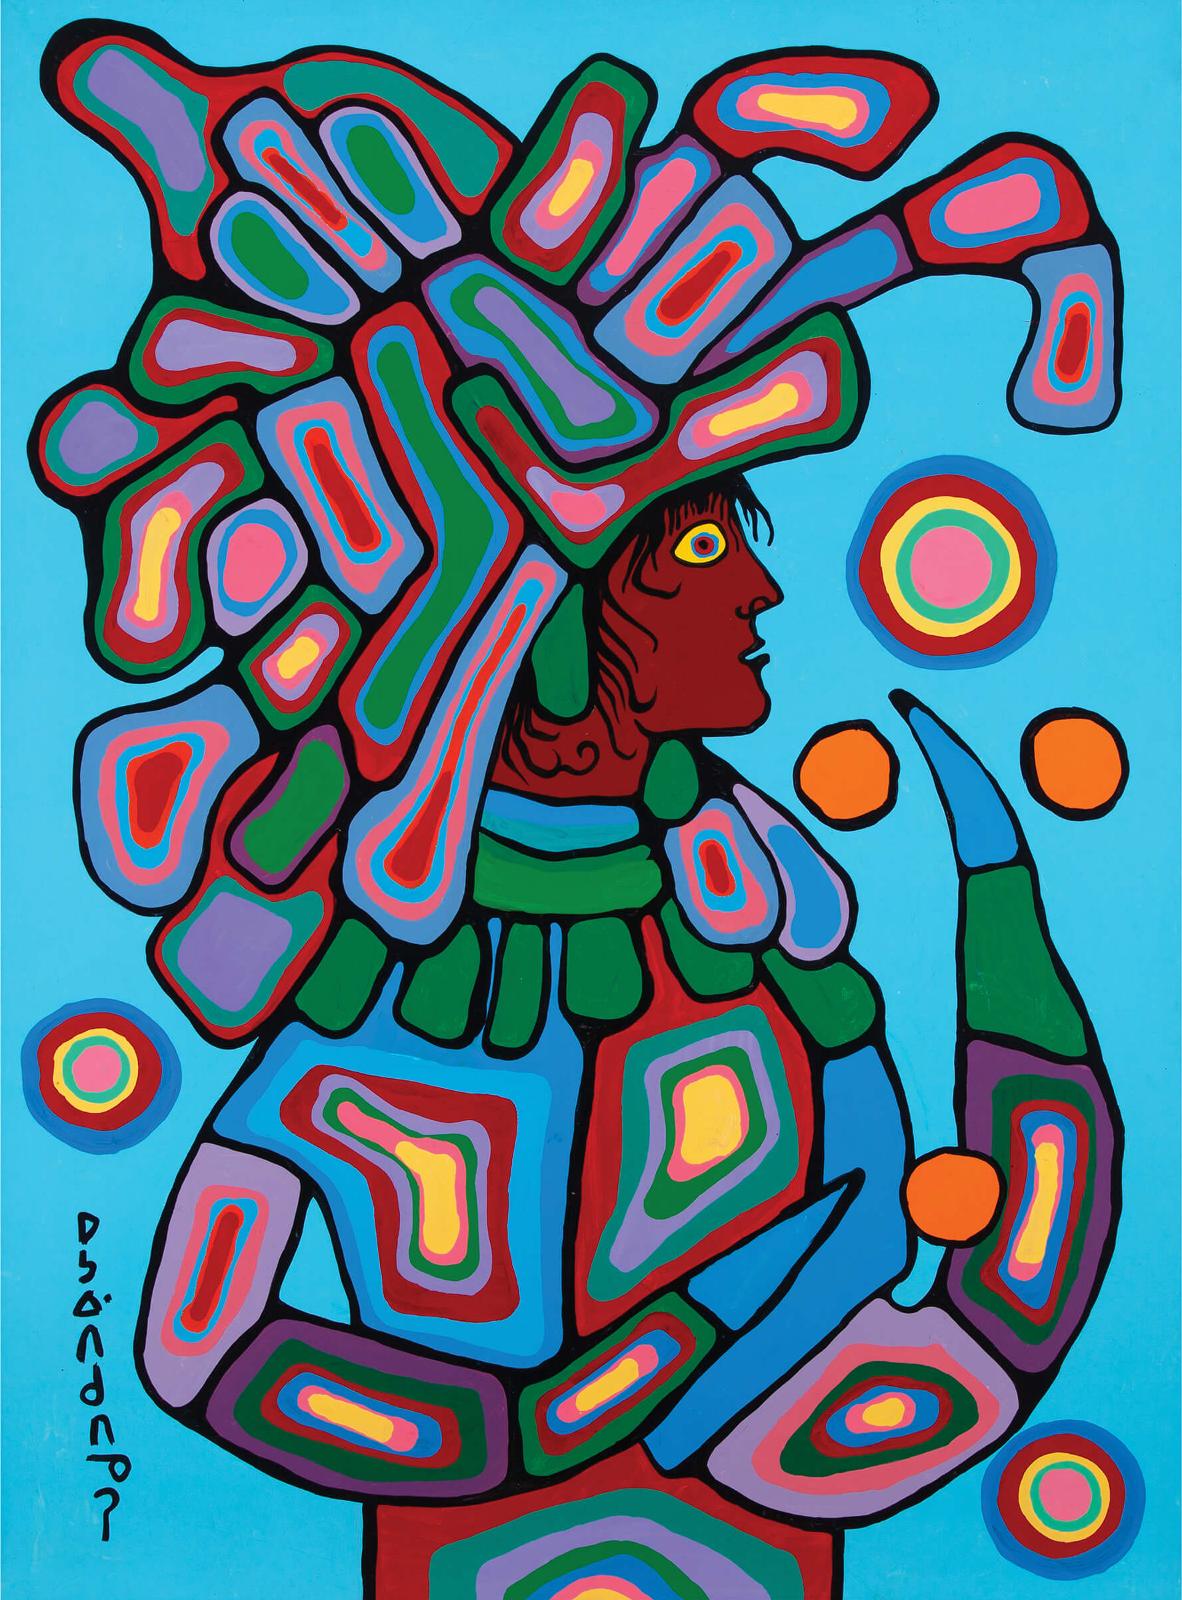 Norval H. Morrisseau (1931-2007) - Self Portrait In Astral Form (Cause And Effect)